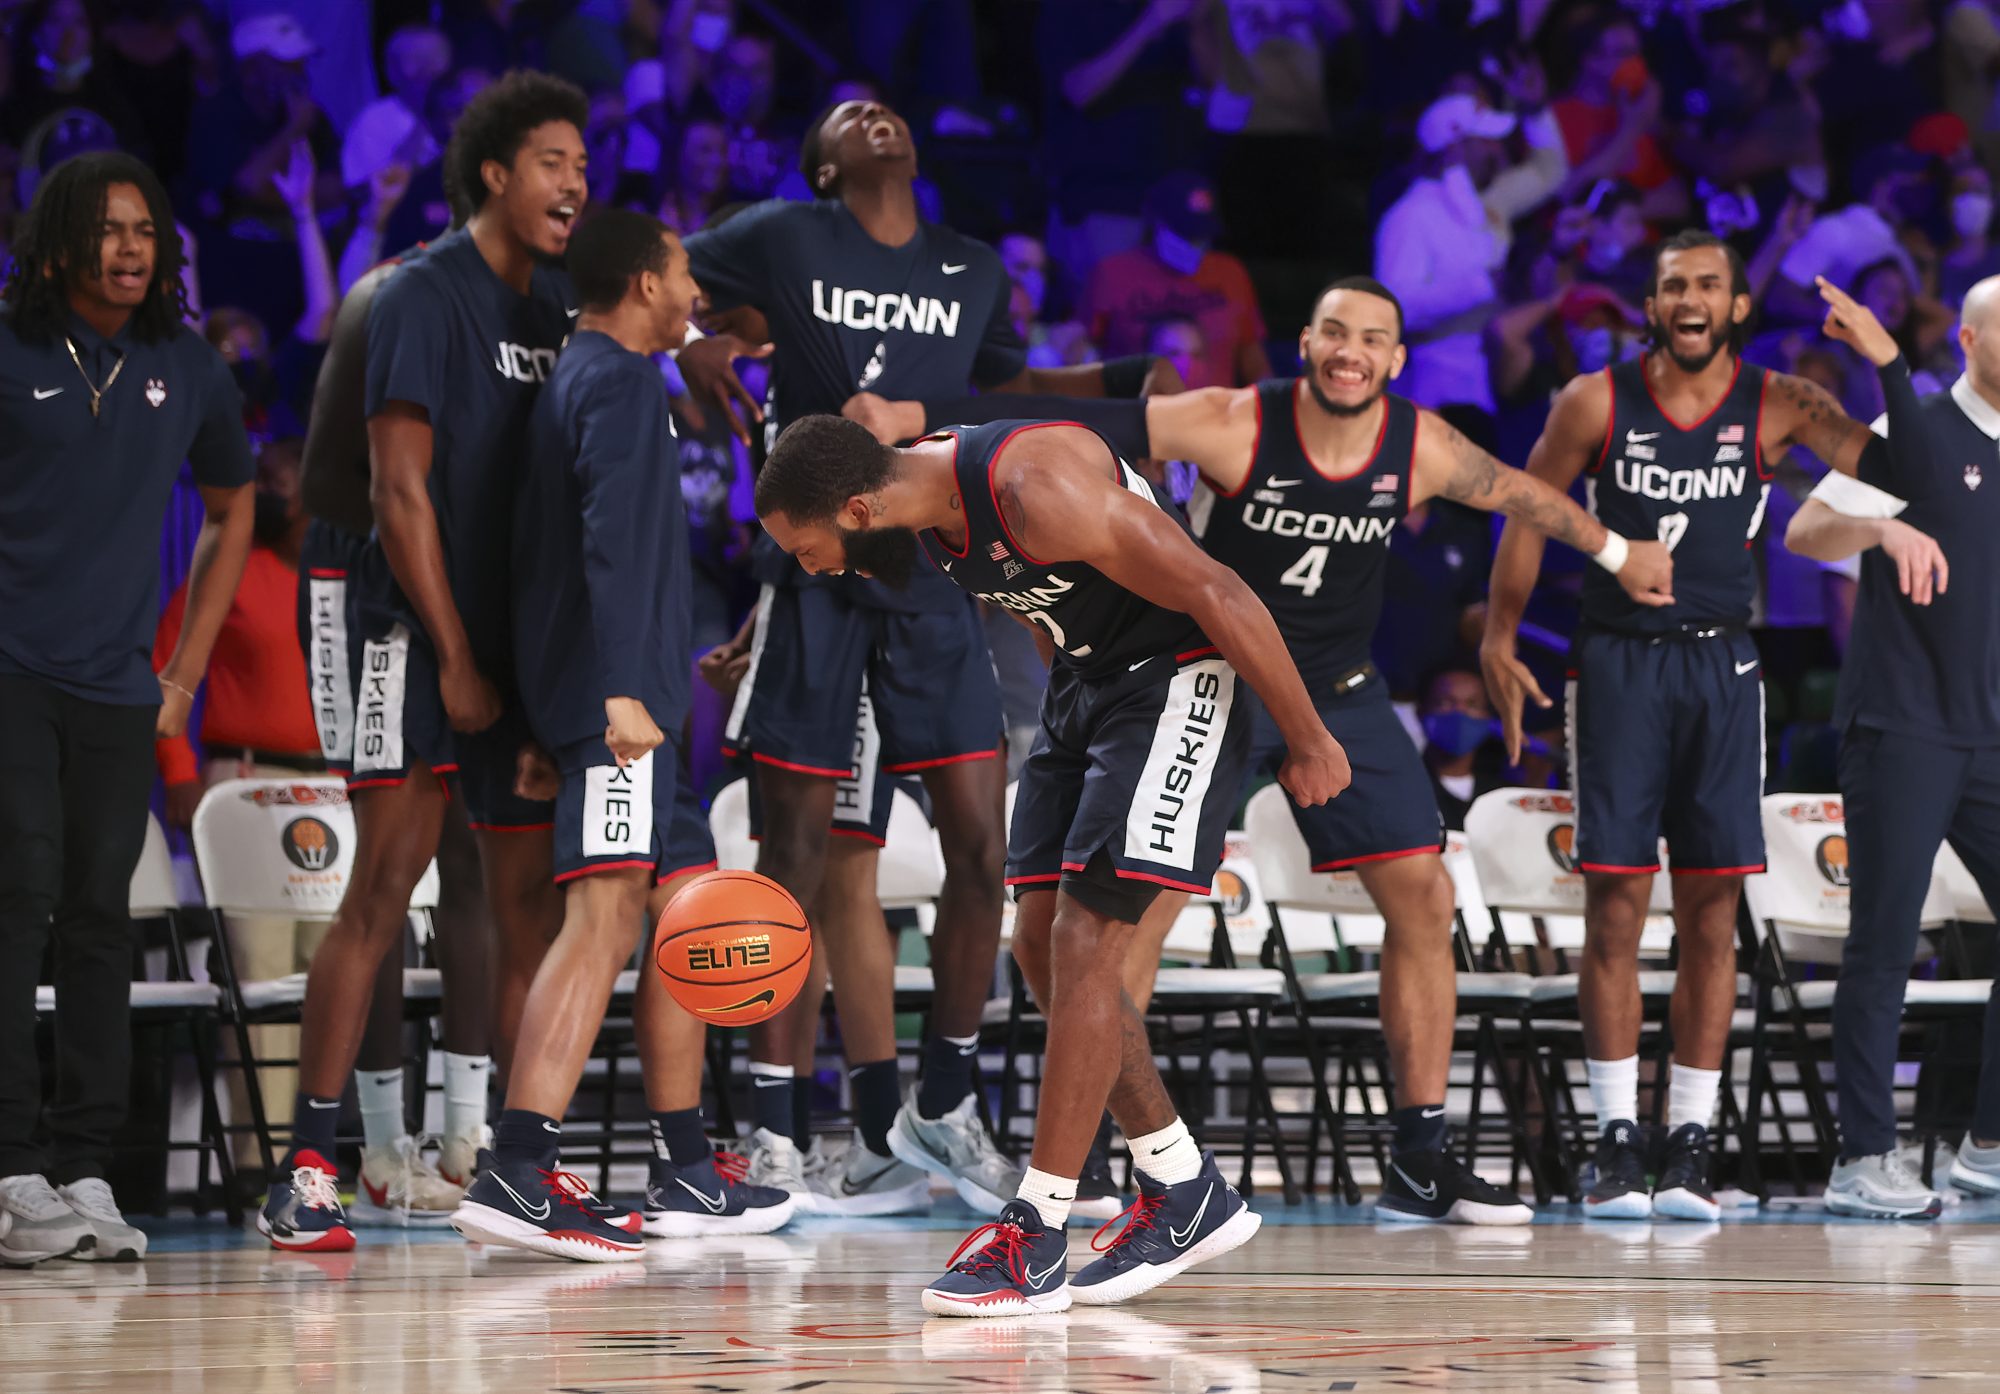 UConn guard R.J. Cole celebrates with teammates after scoring during a game against Auburn in the 2021 Battle 4 Atlantis at Imperial Arena.